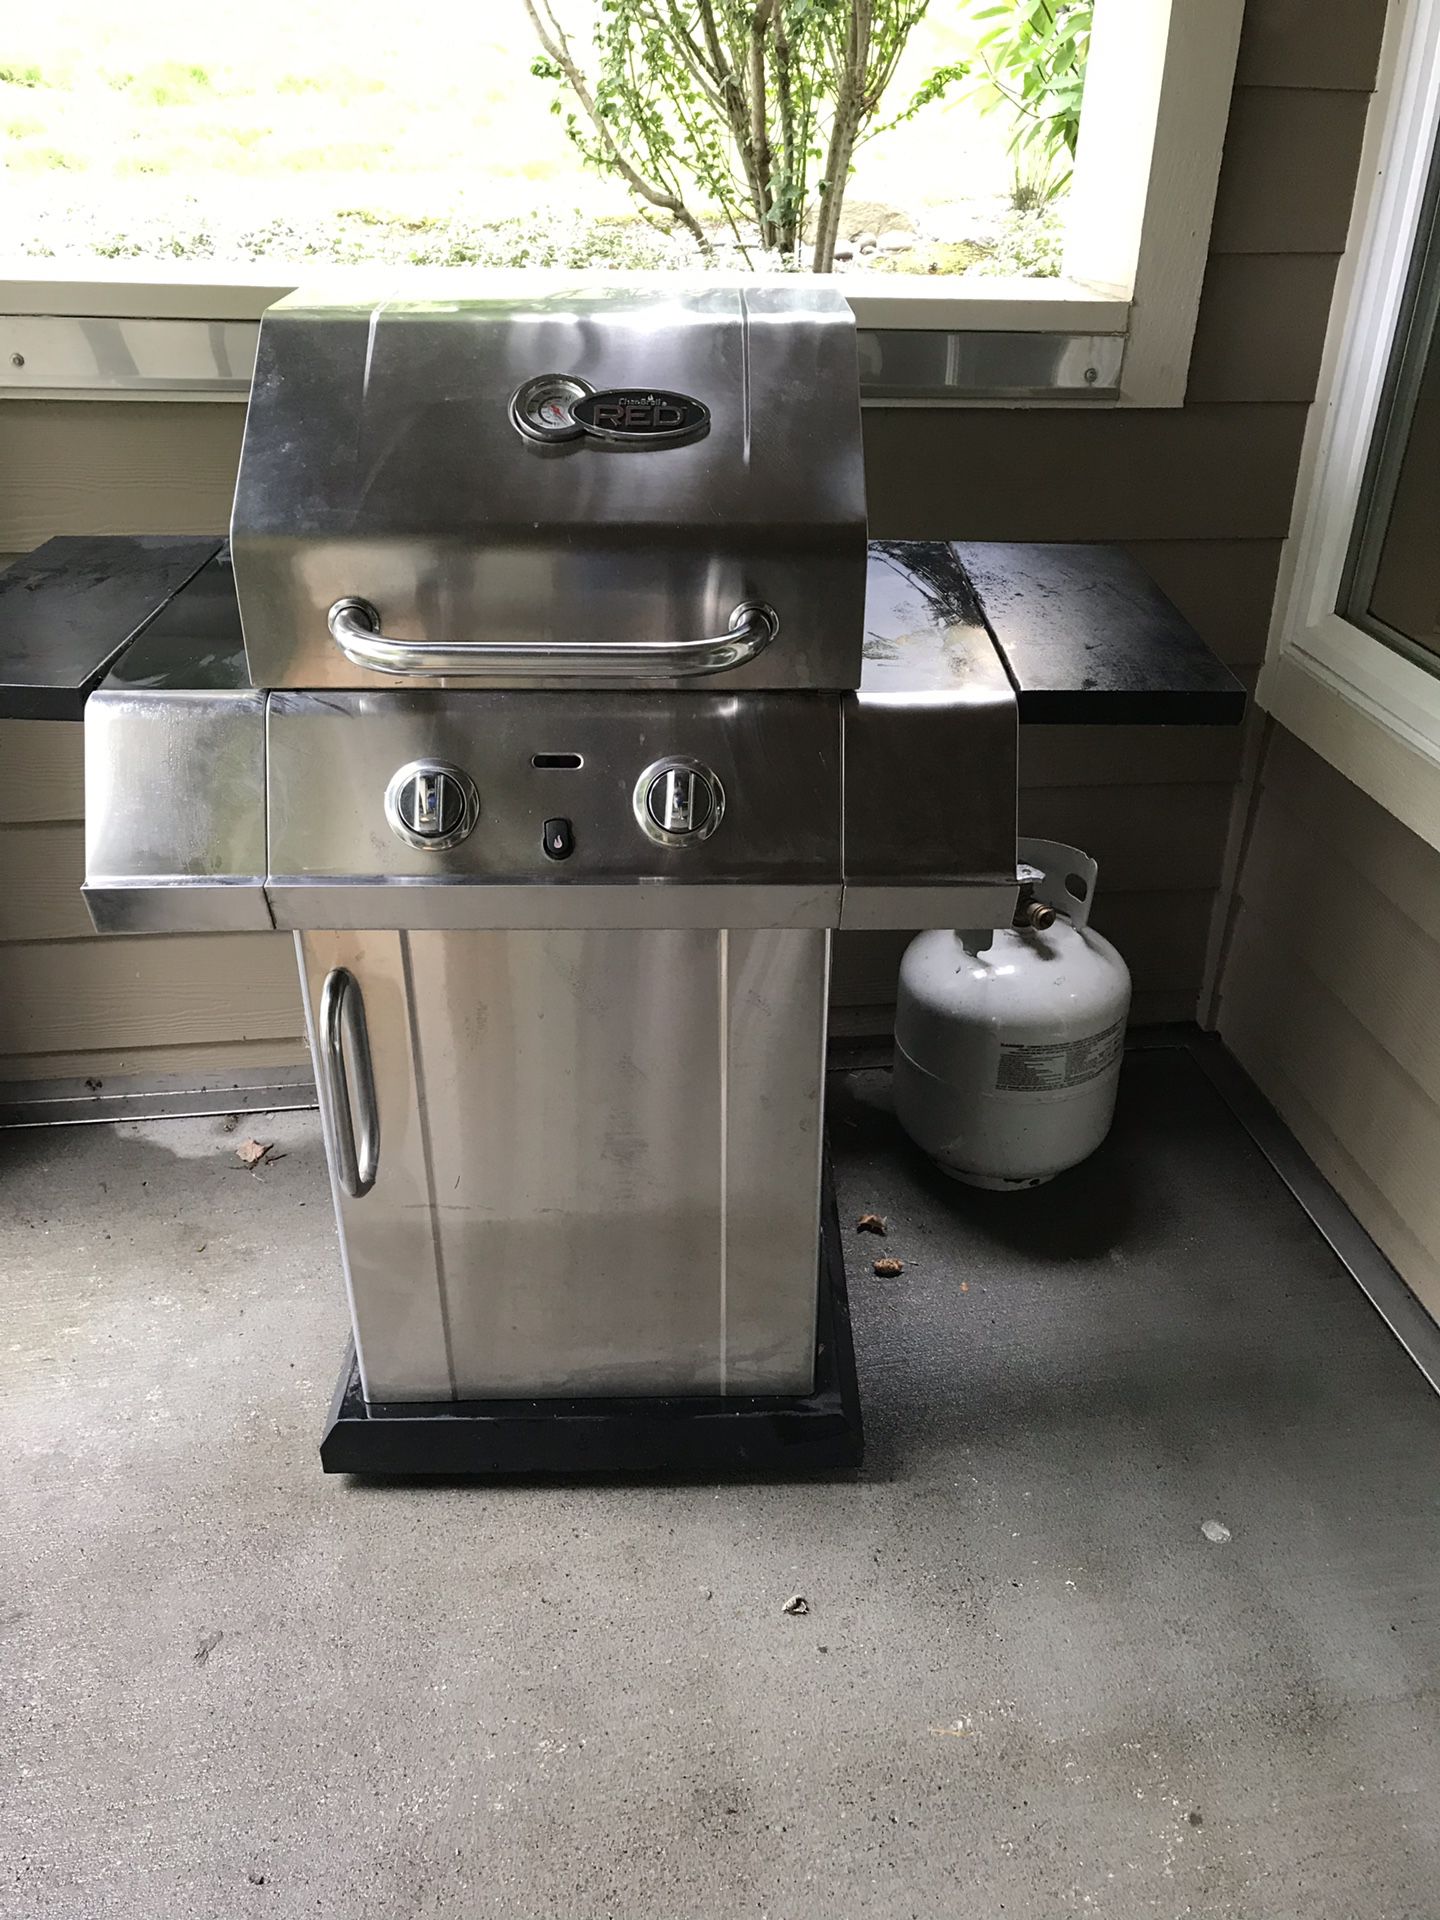 Grill charbroil brand FREE